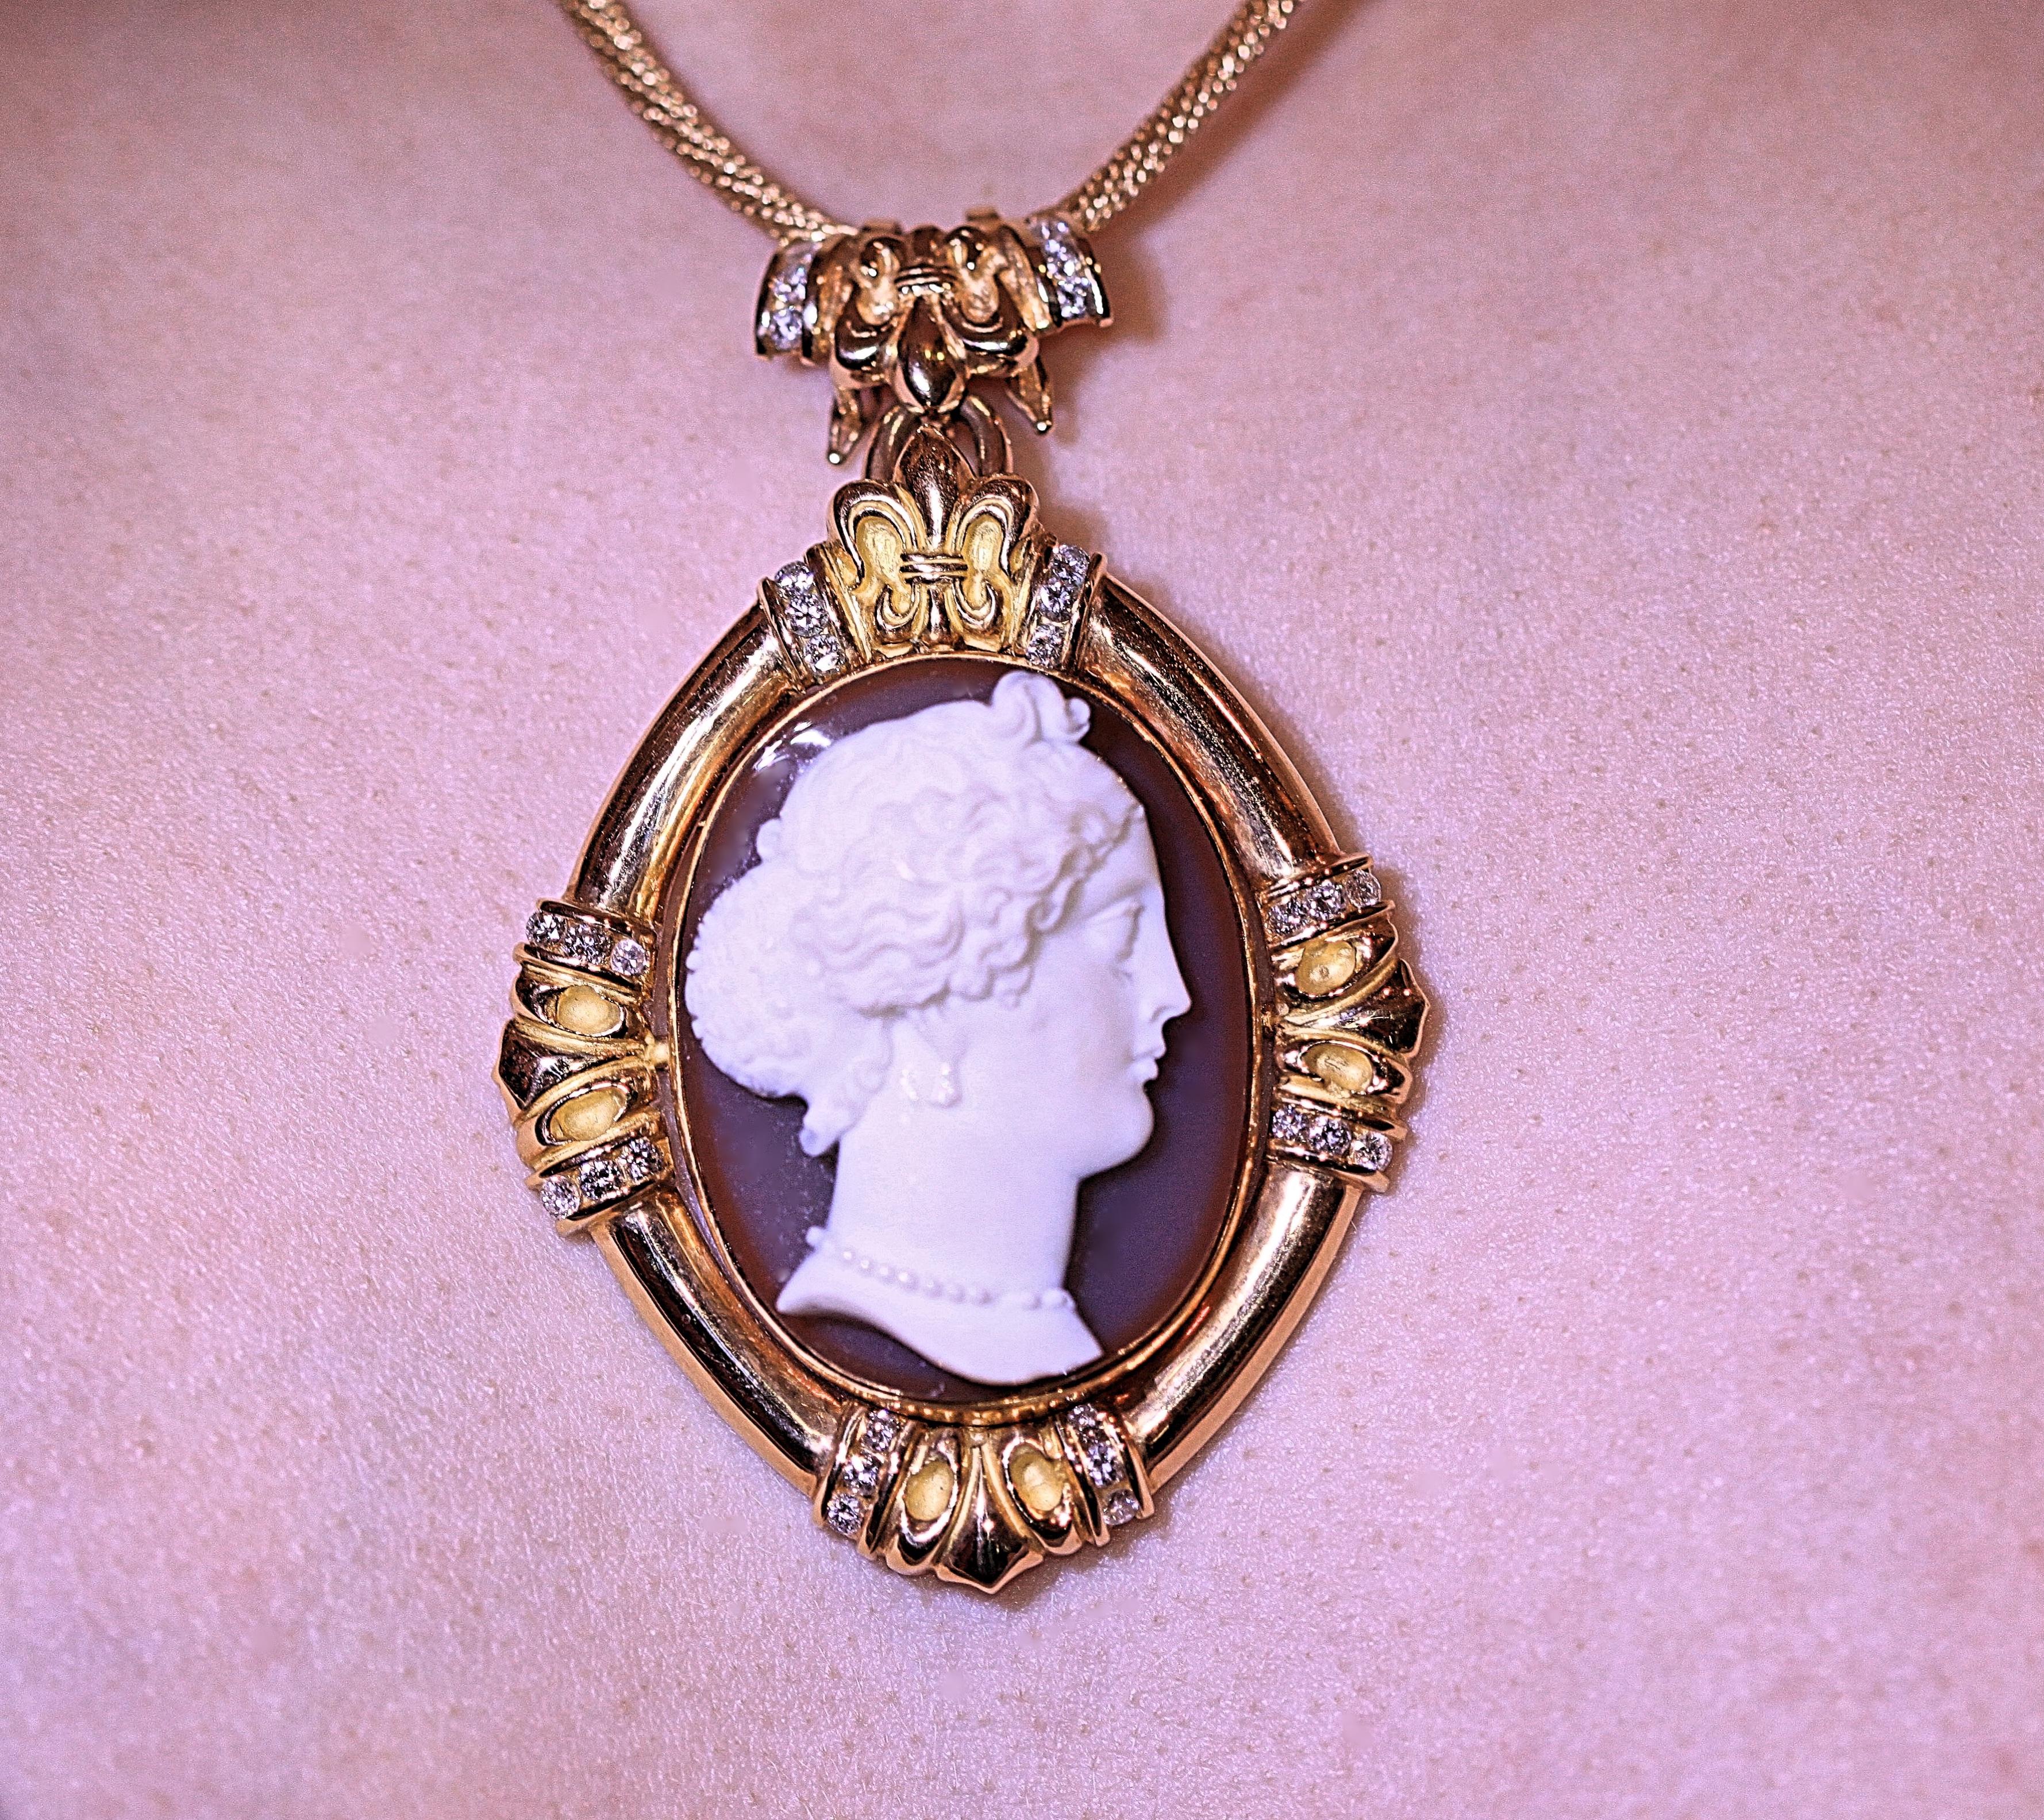 Antique French Agate Cameo Contemporary Diamond Mounting Brooch Necklace Pendant For Sale 6